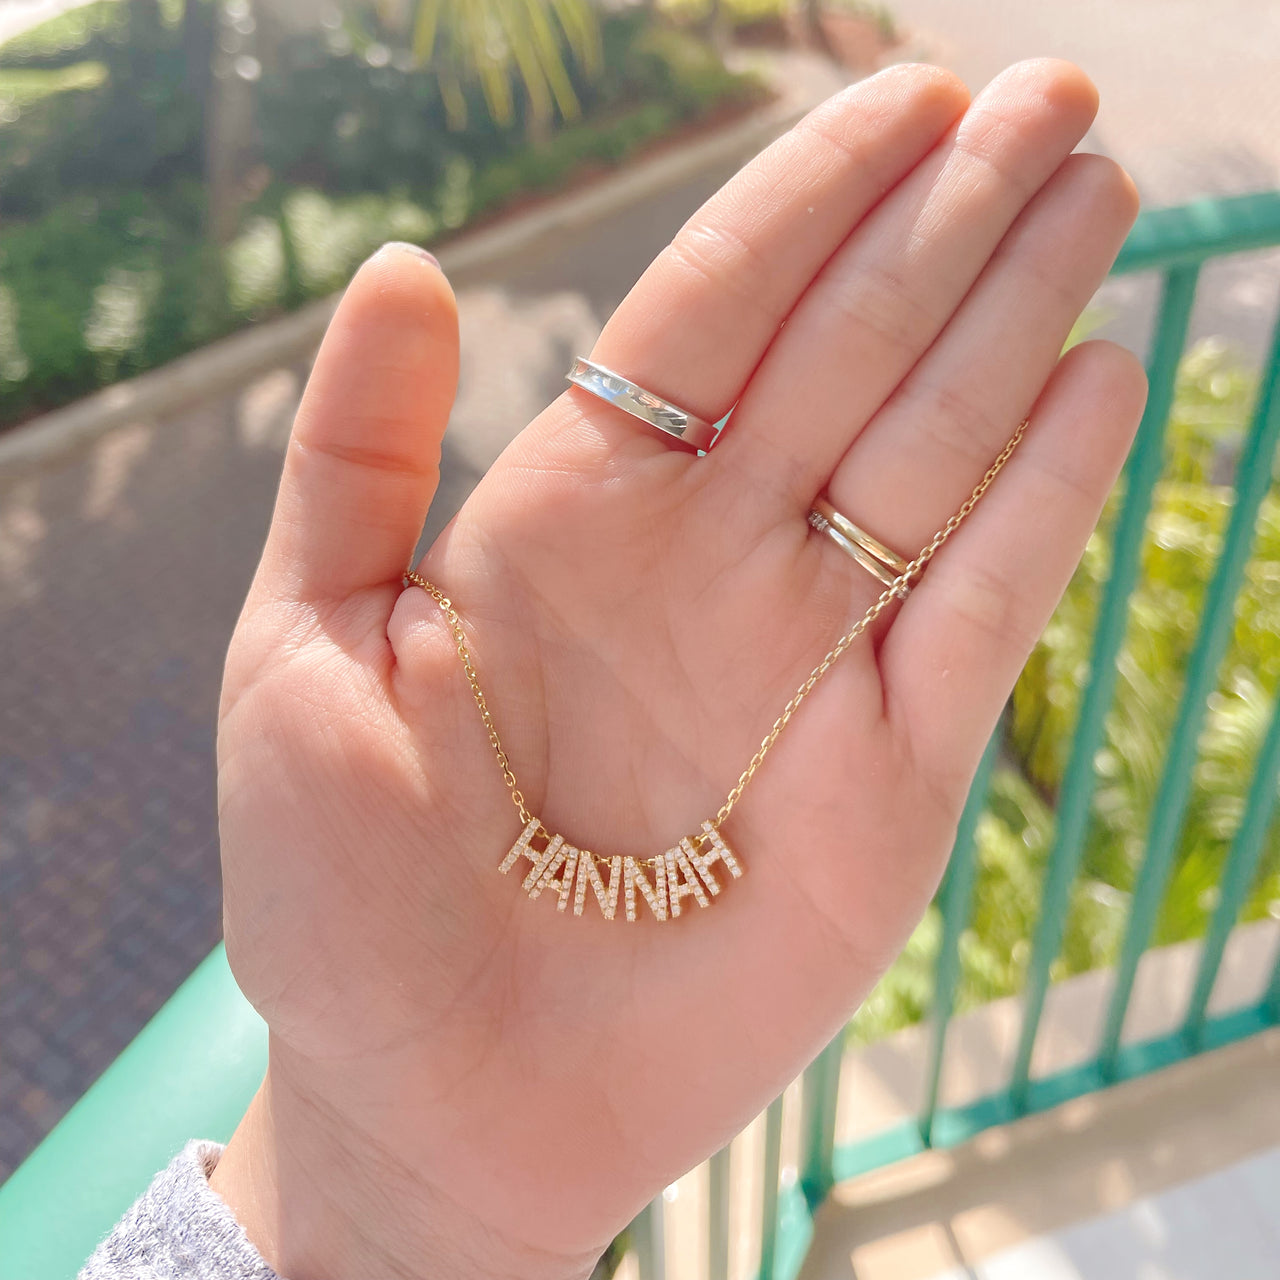 The Personalized Dainty Gold Necklace